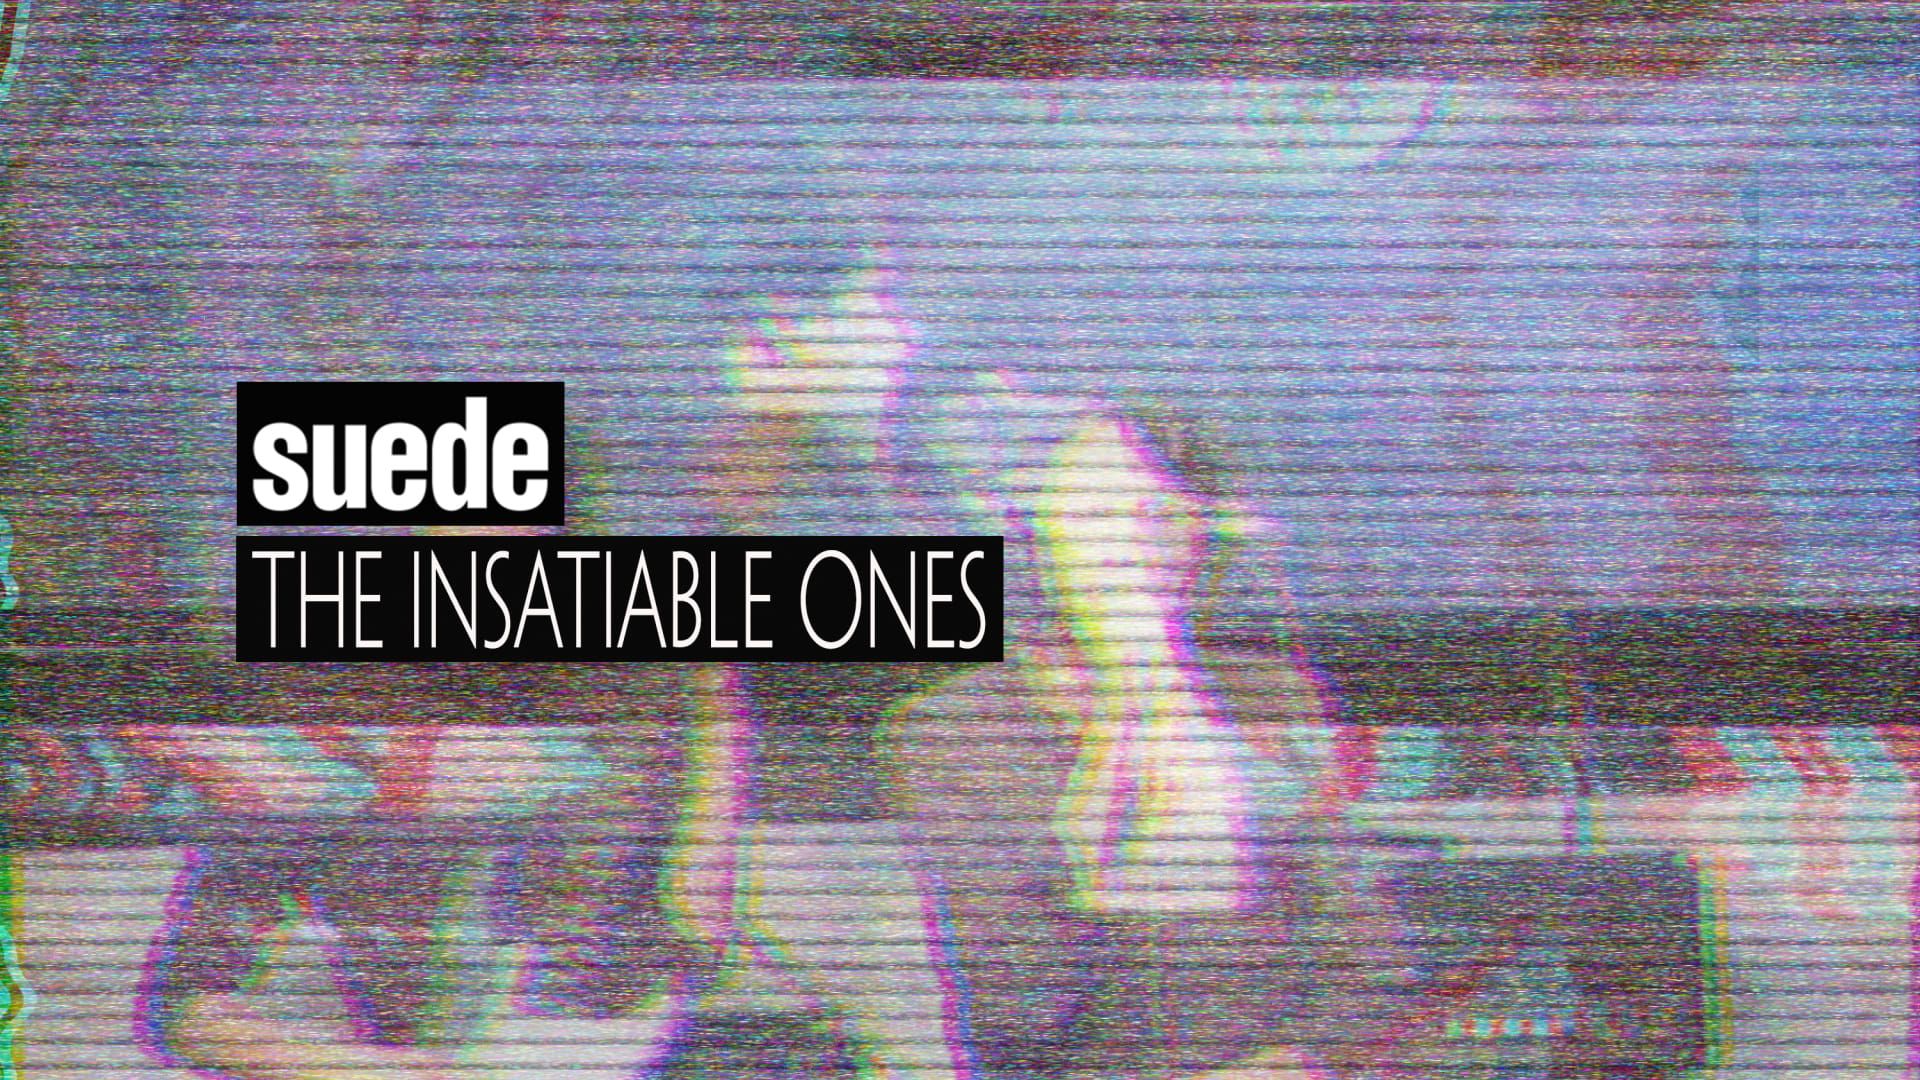 Suede: The Insatiable Ones background